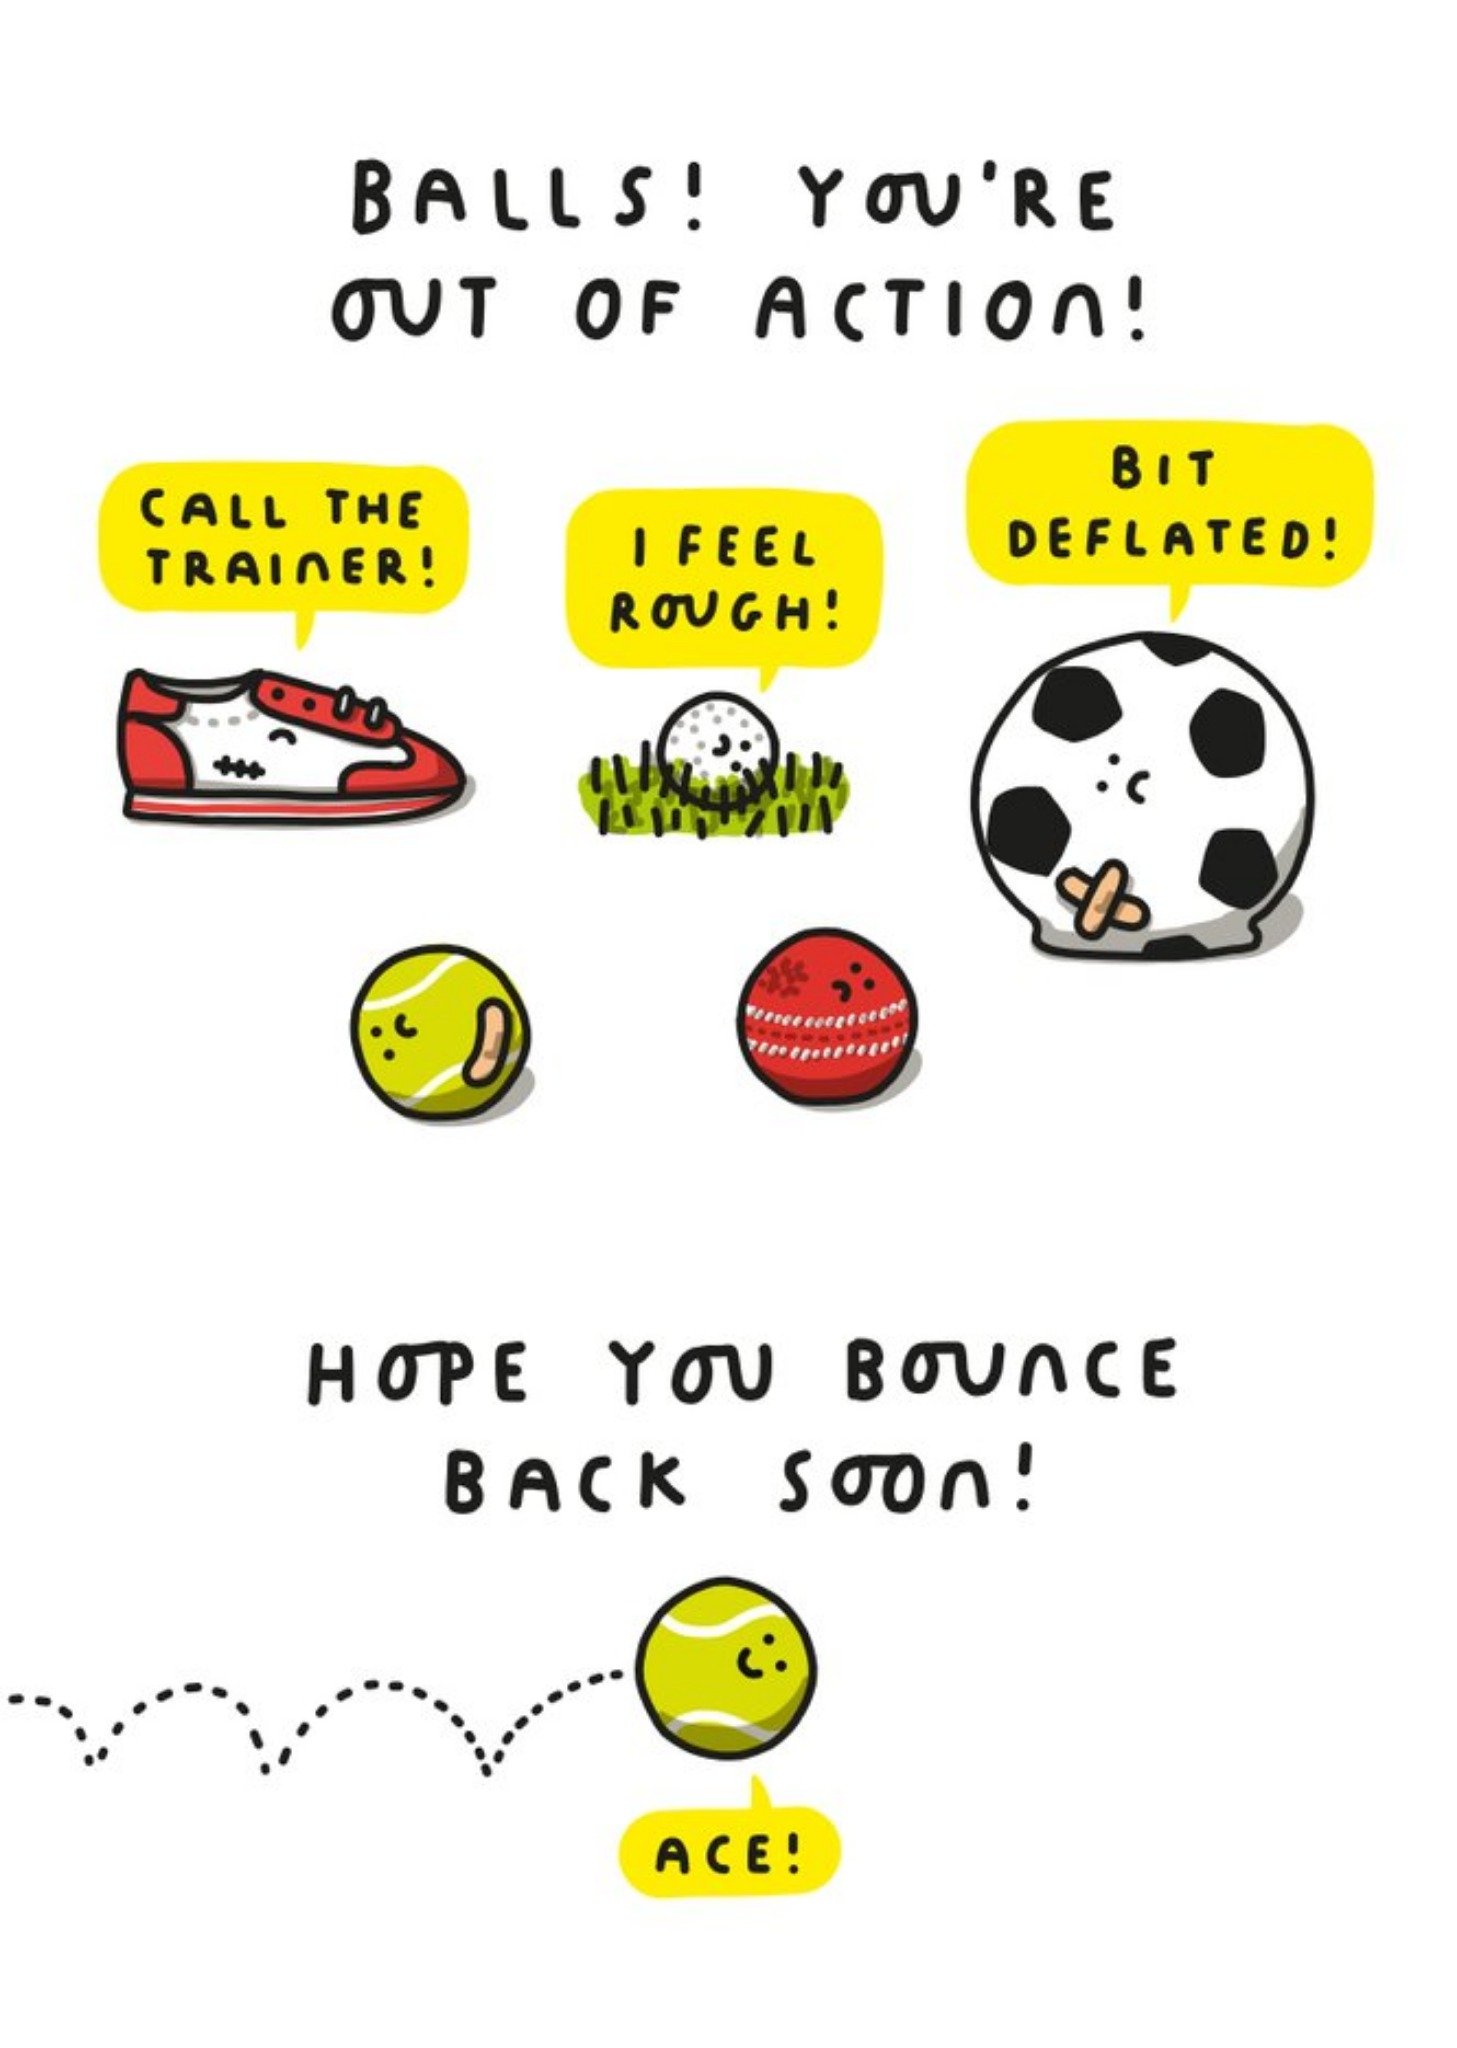 Moonpig Funny Pun Balls Youre Out Of Action Get Well Soon Card, Large